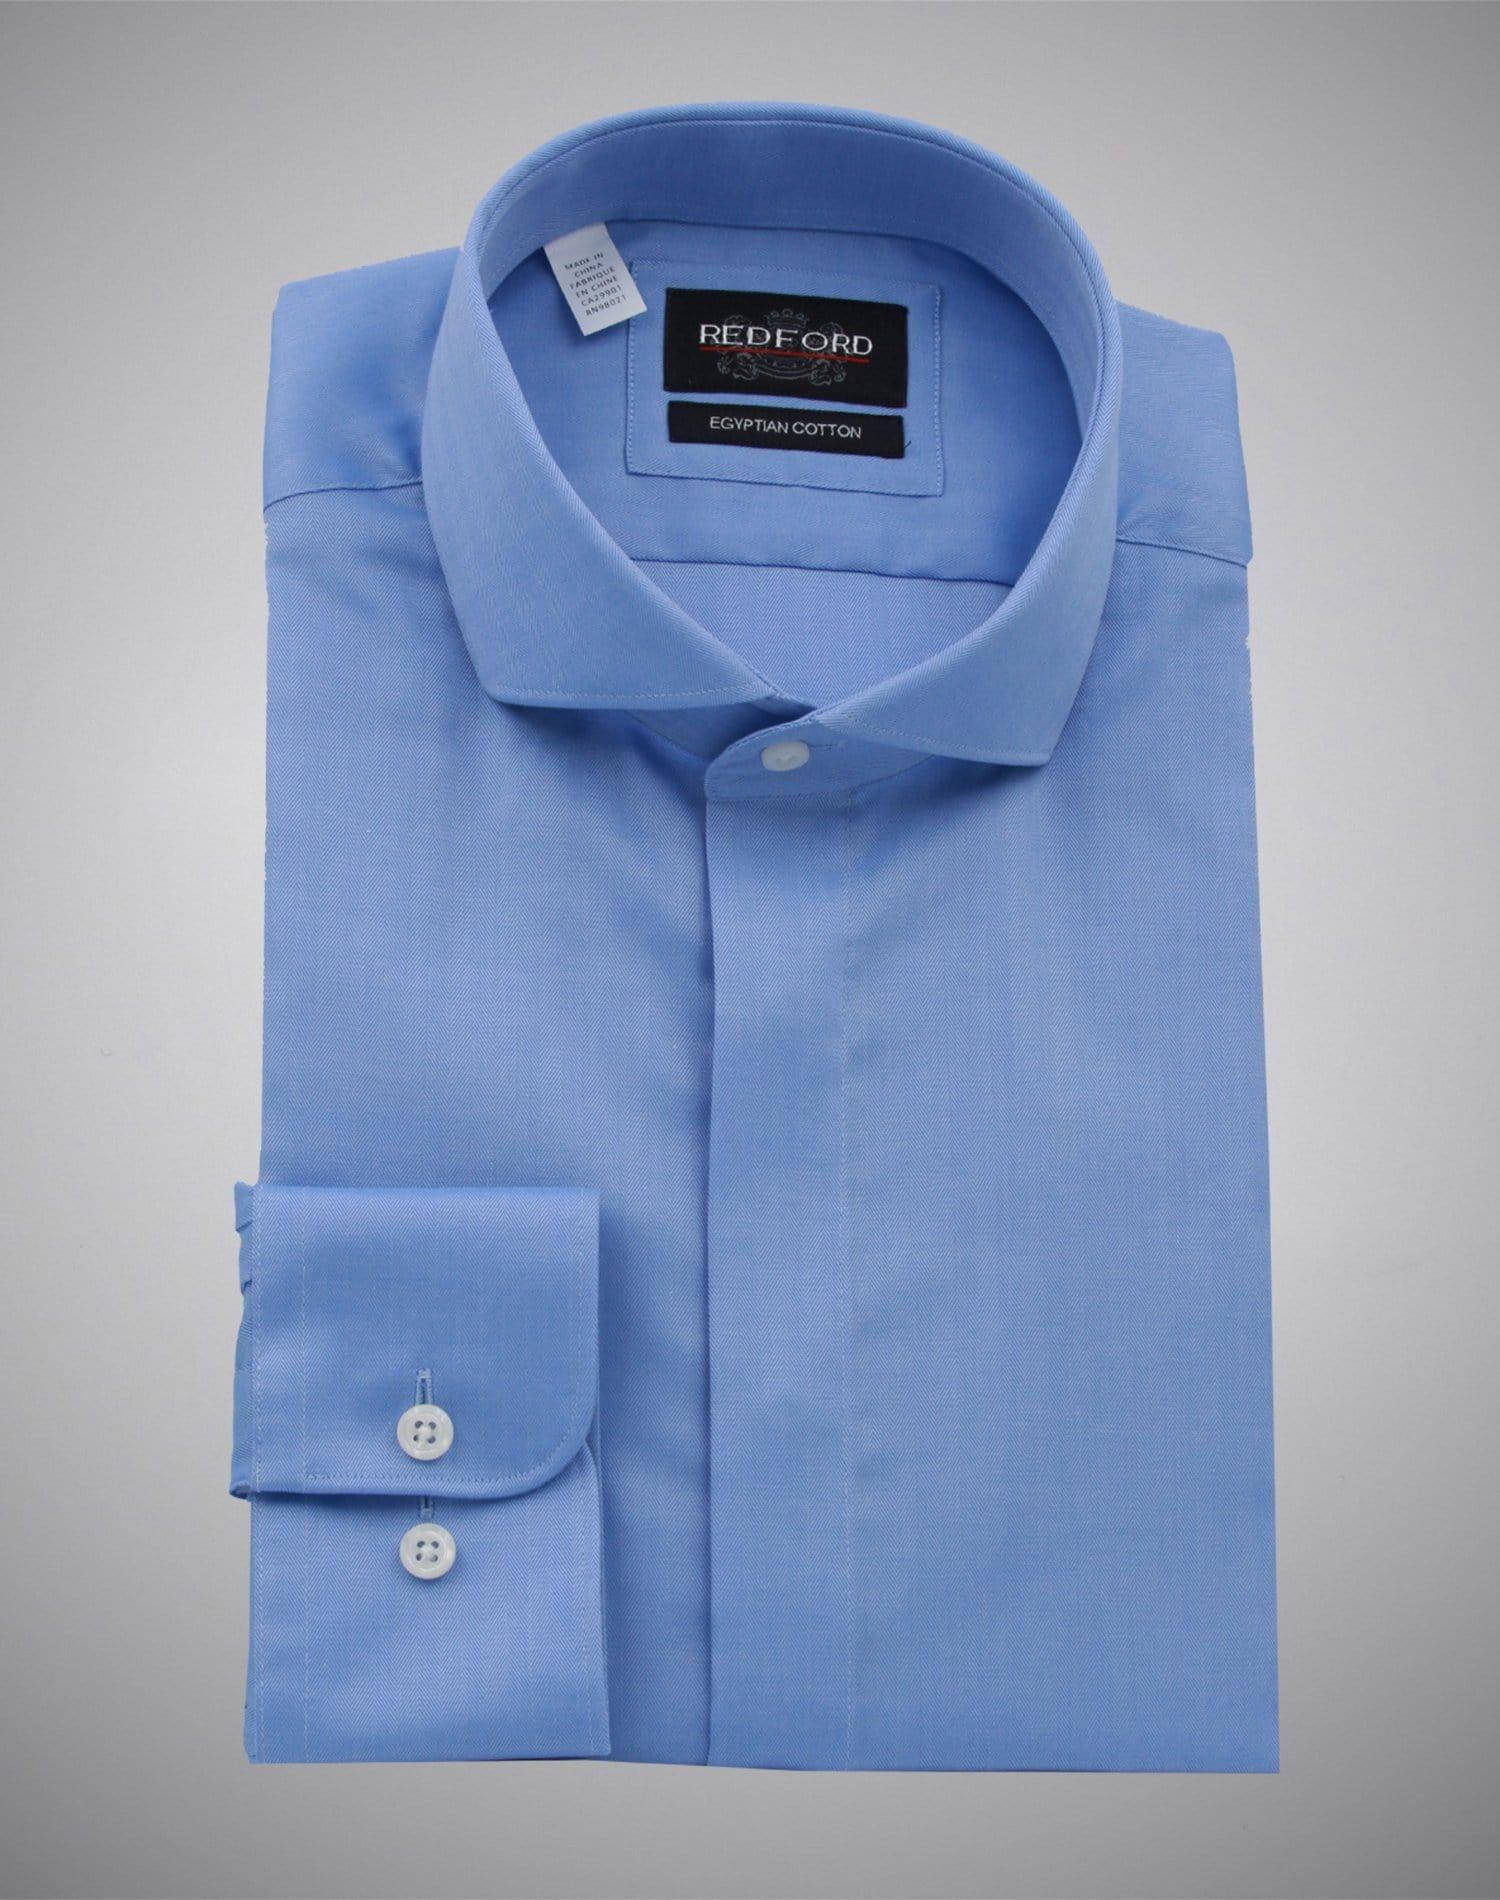 Solid Blue Shirt - Just White Shirts